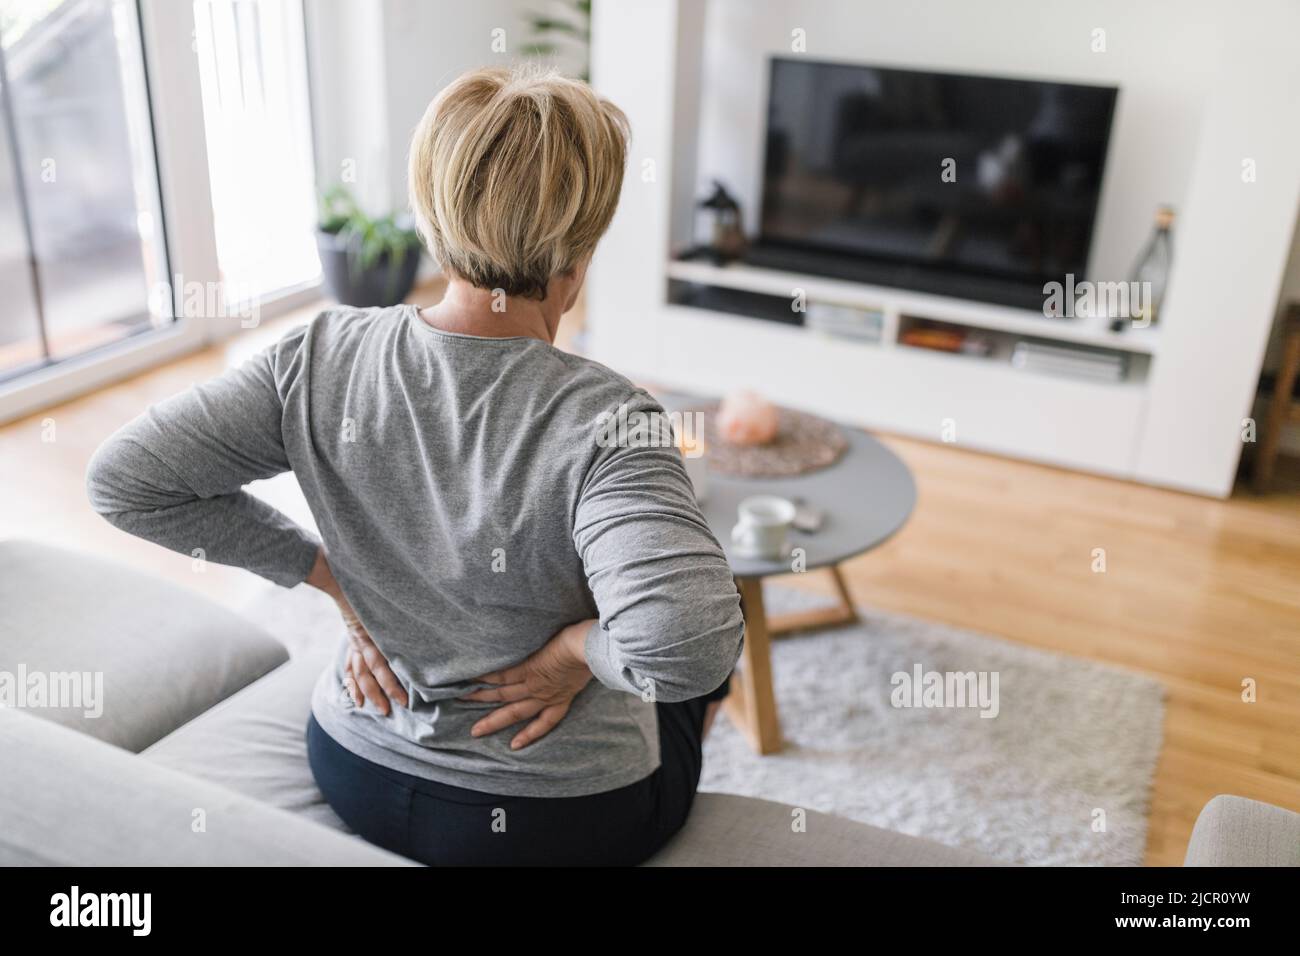 Elderly woman at home with lower back pain Stock Photo